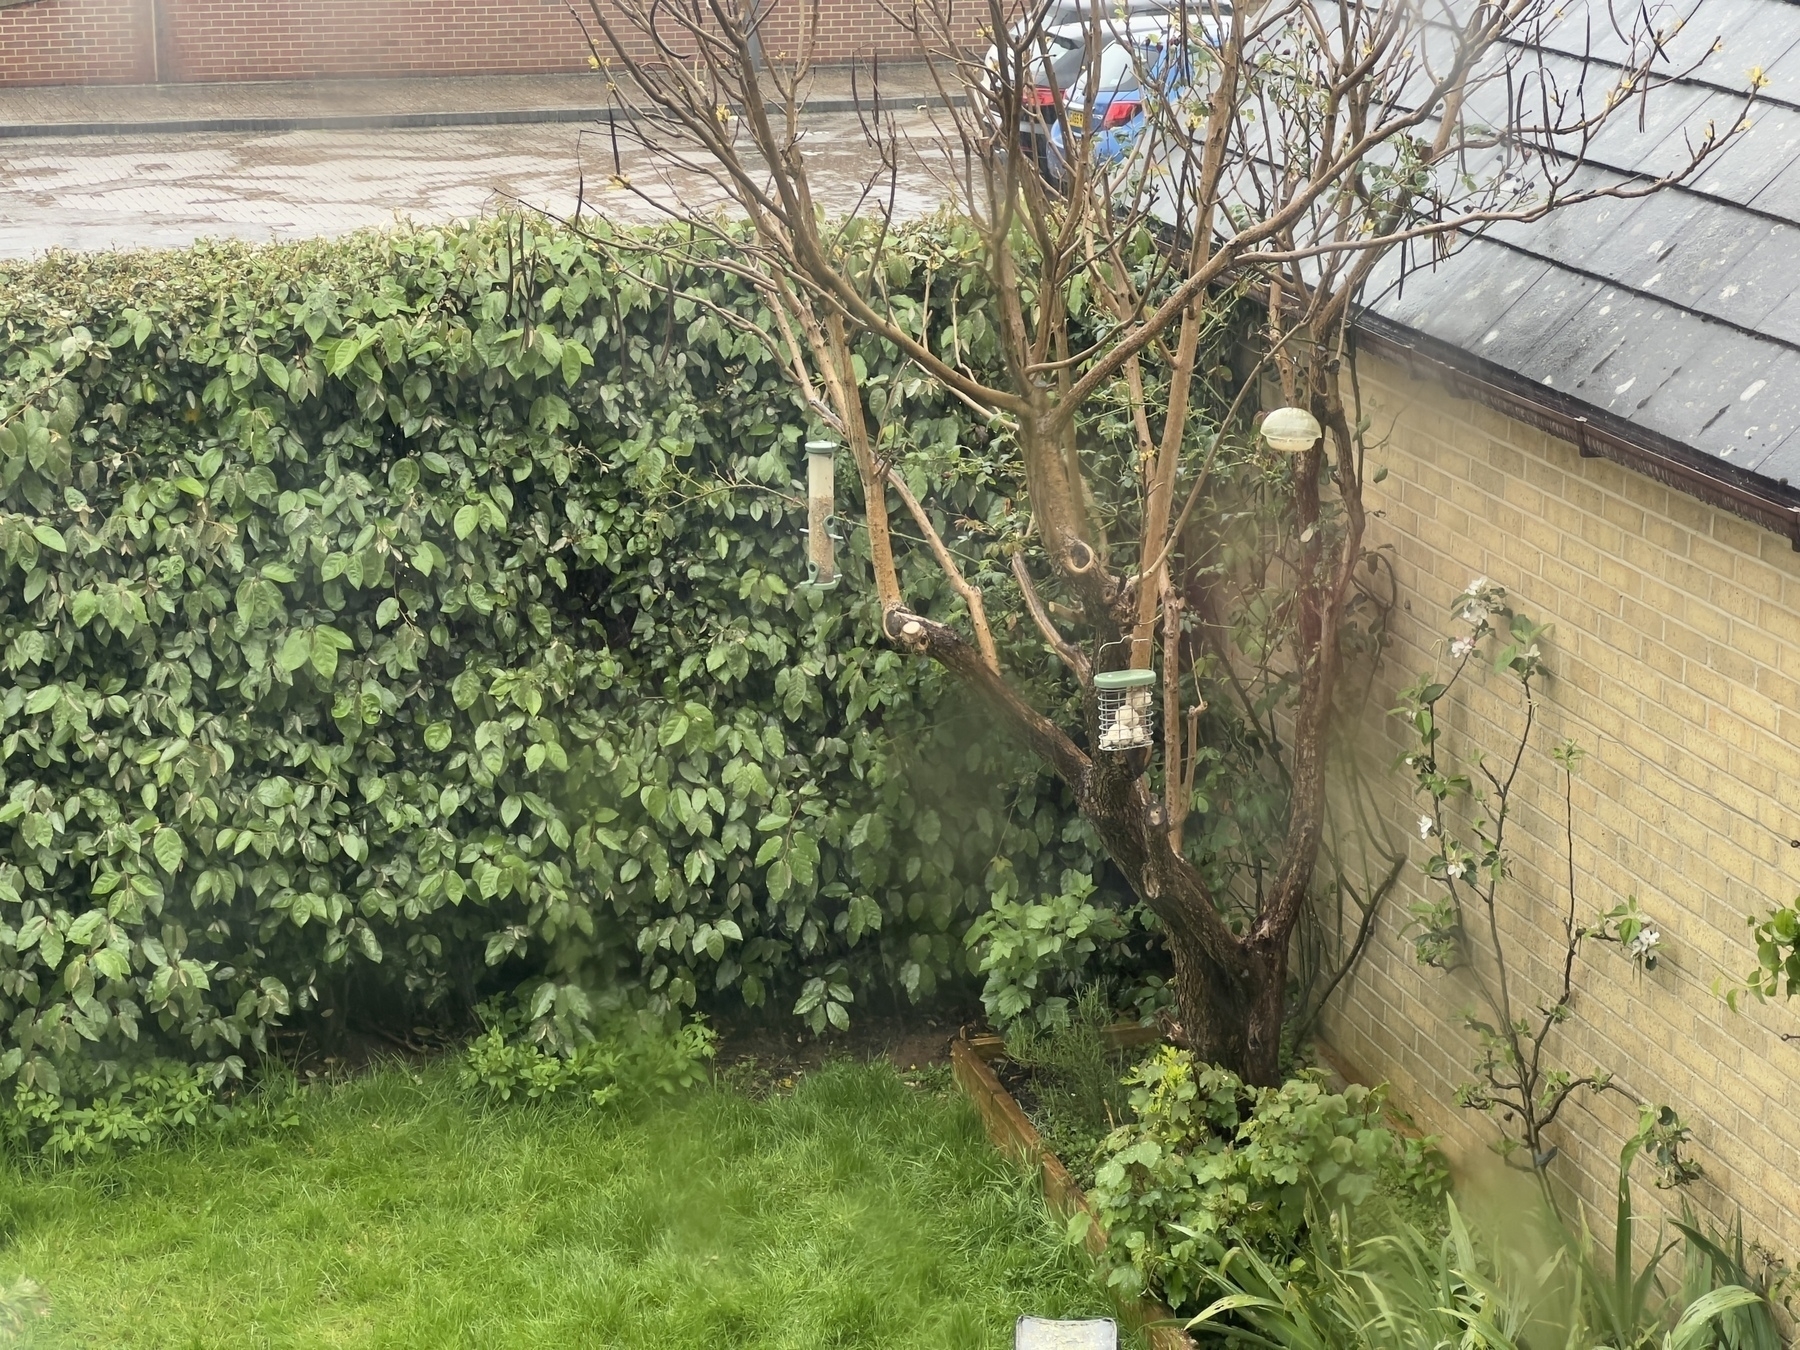 A rainy back garden in Bank Holiday Monday. 